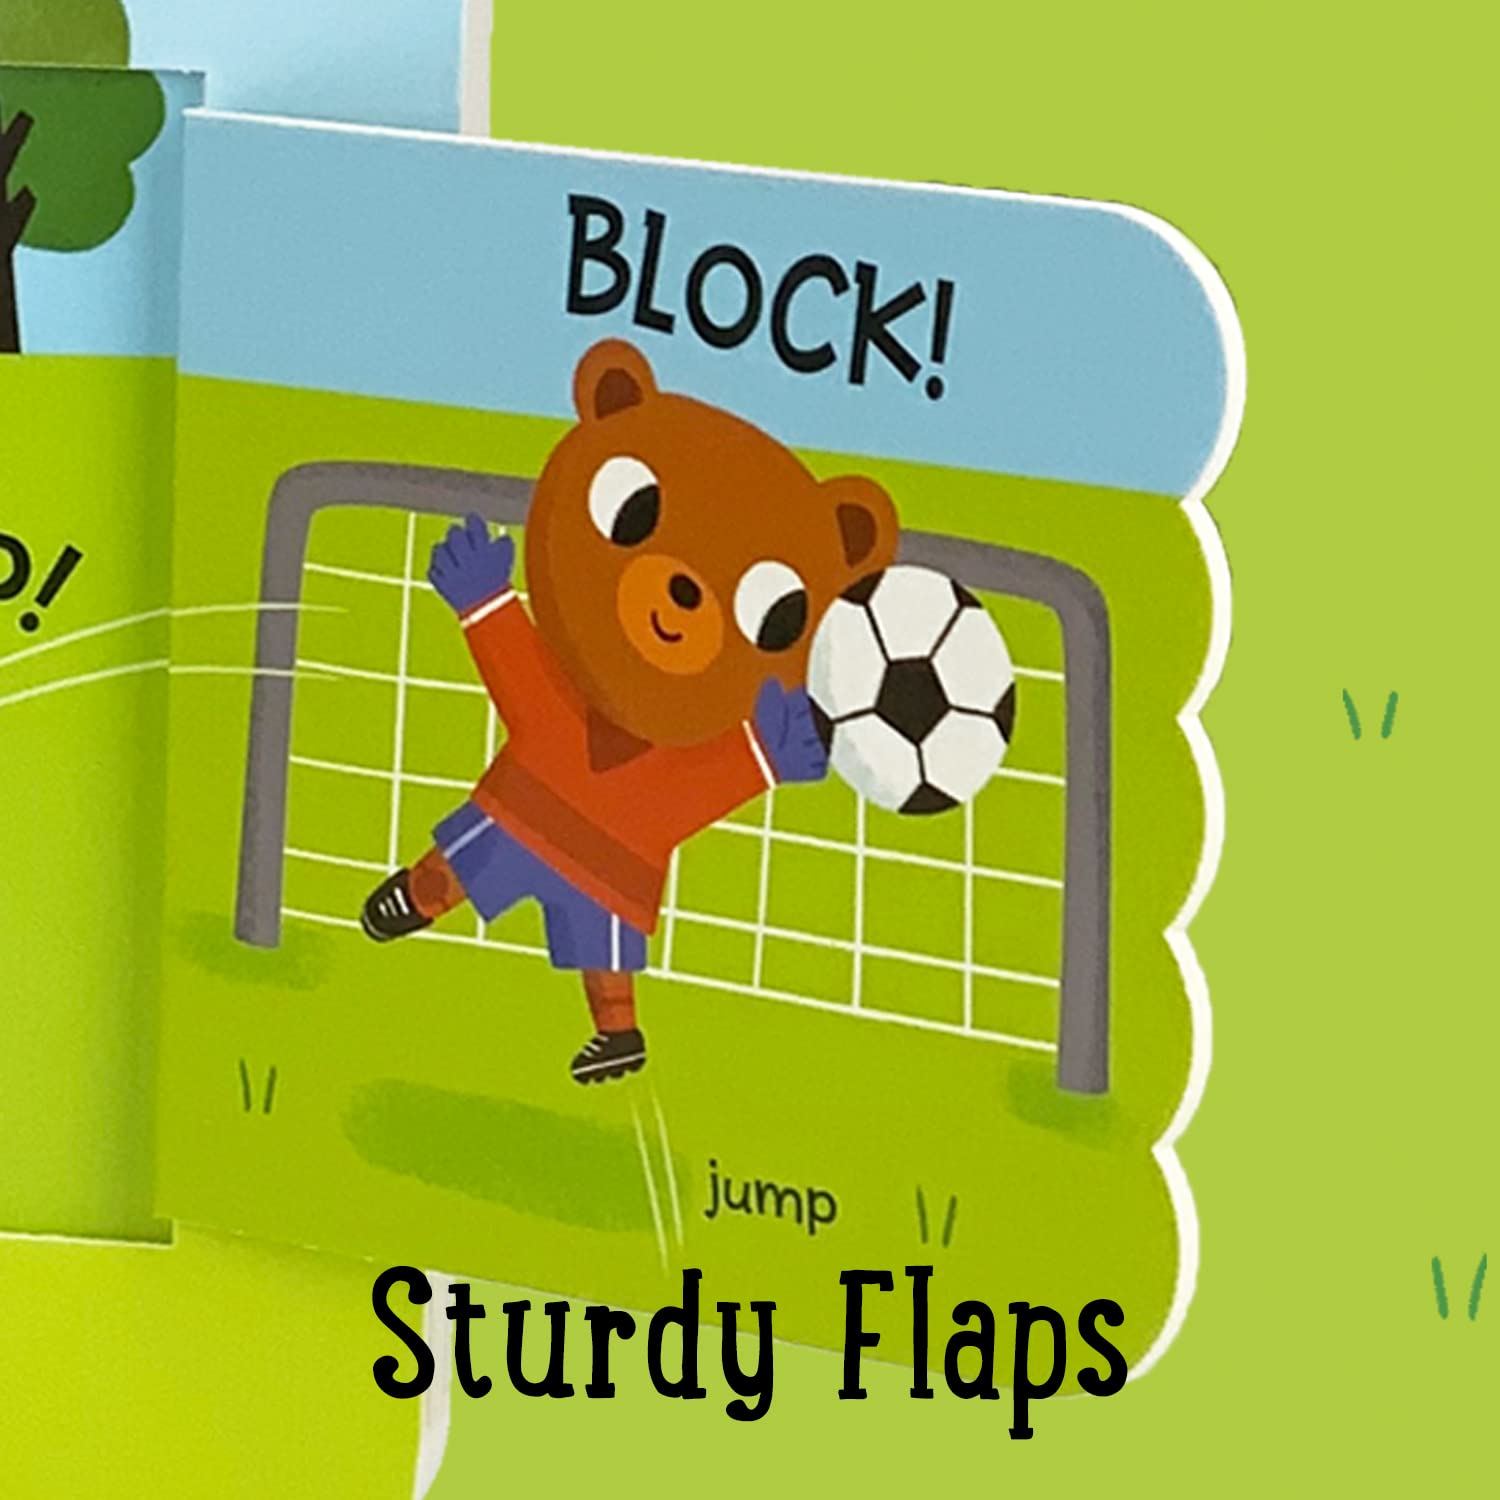 Let's Play Soccer! A Lift-a-Flap Board Book for Babies and Toddlers, Ages 1-4 (Children's Interactive Chunky Lift-A-Flap Board Book)